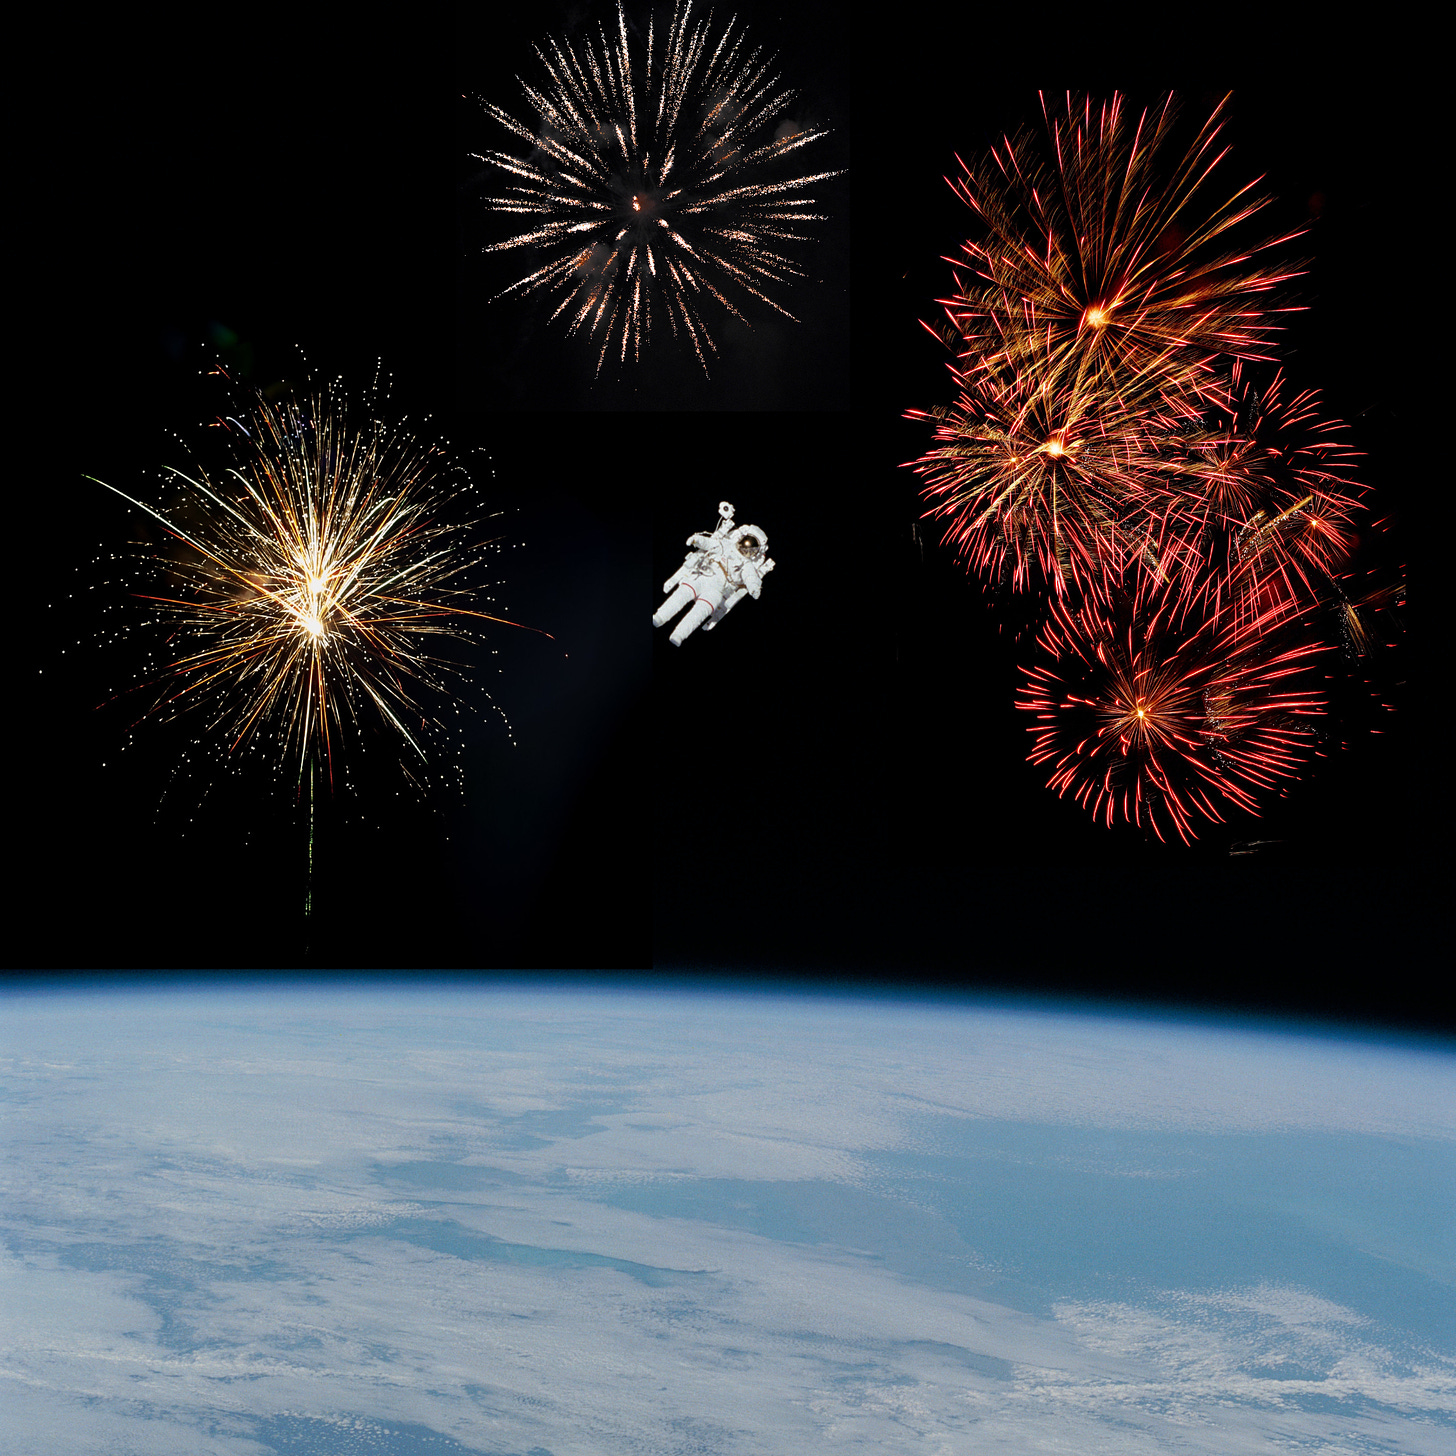 A composite image showing an astronaut in space suit floating above the Earth's surface as fireworks explode around him